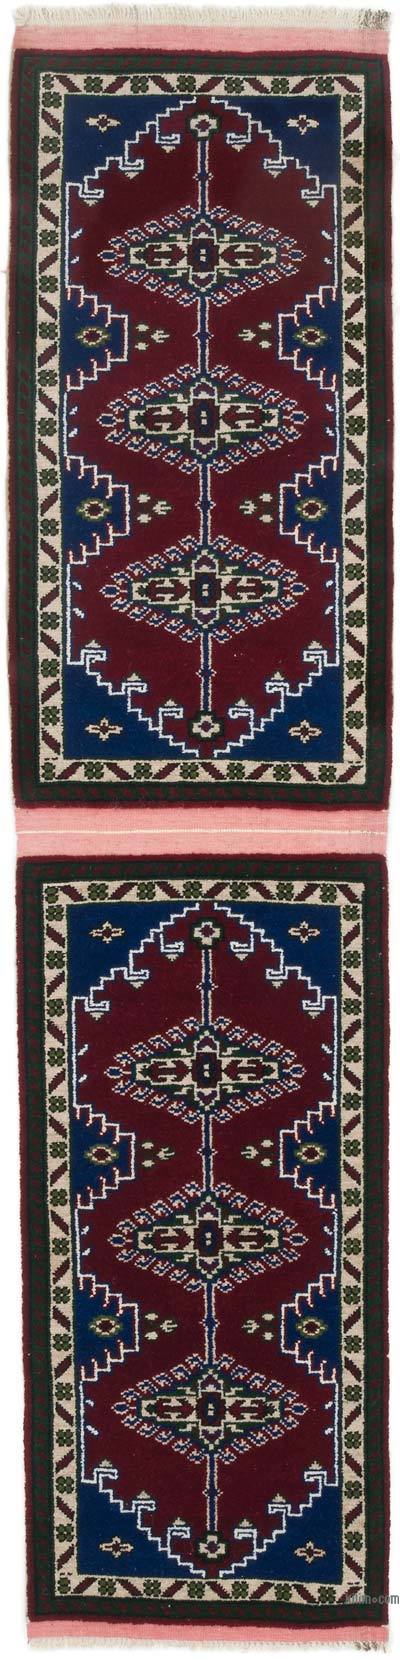 Vintage Turkish Hand-Knotted Runner - 1' 9" x 7' 5" (21 in. x 89 in.)